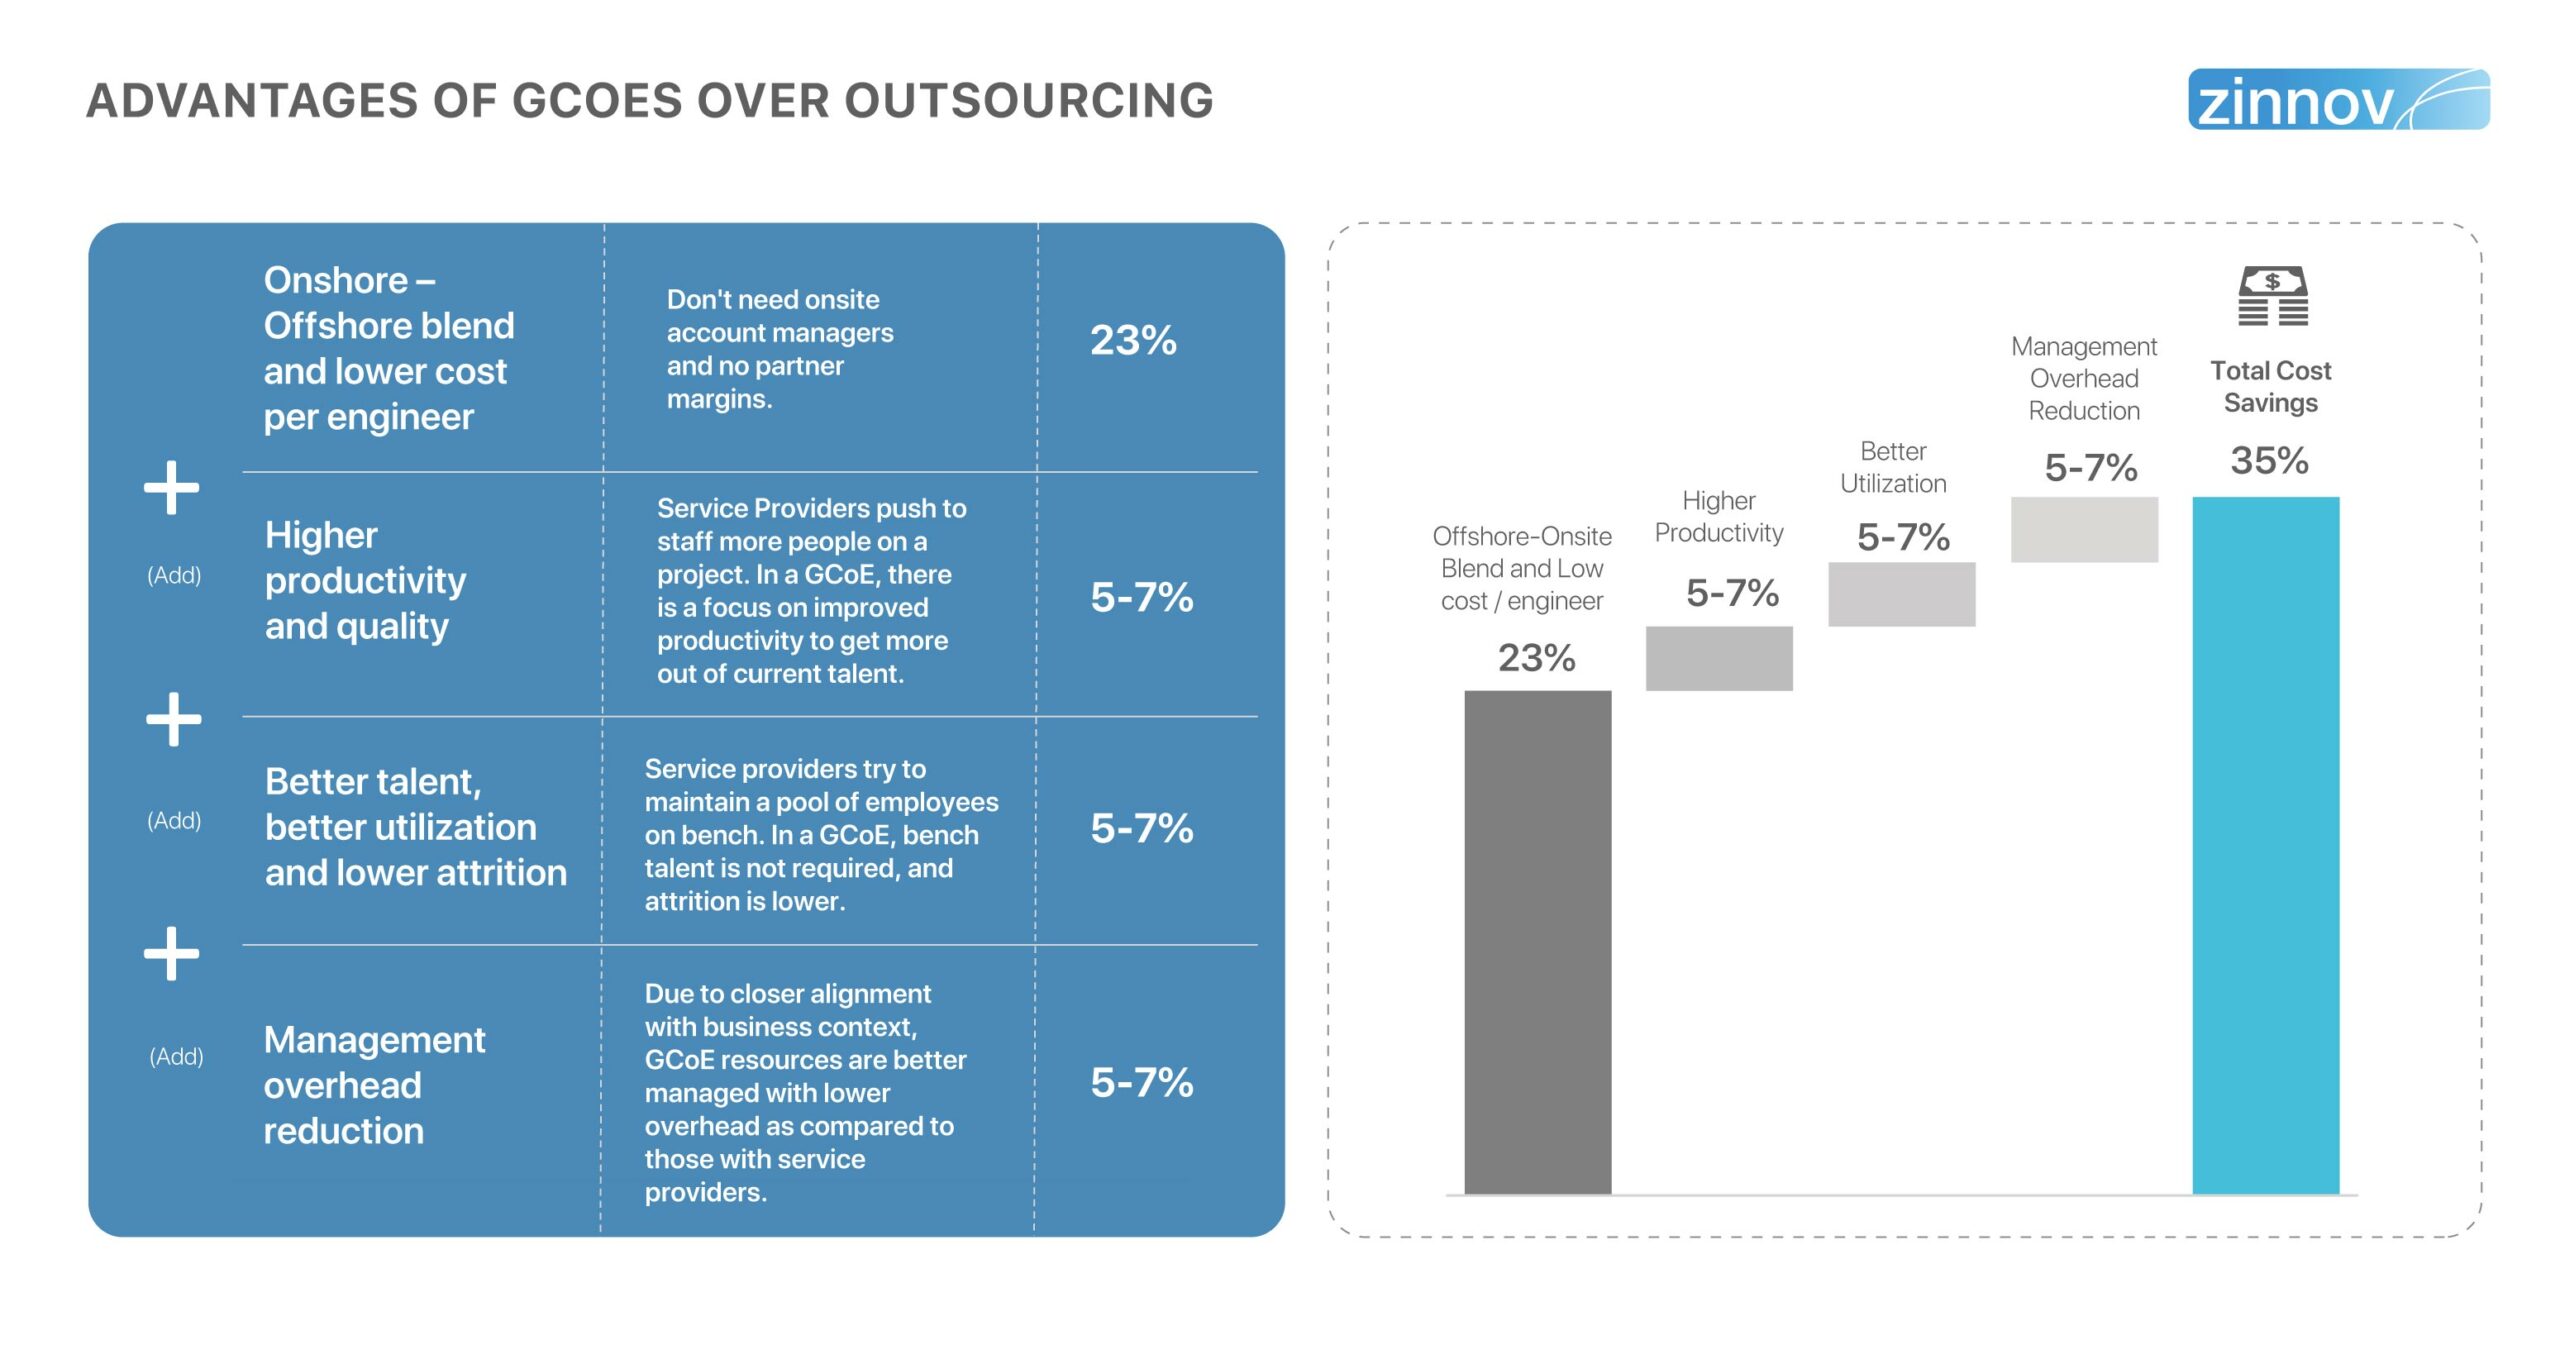 Advantages of GCoEs over outsourcing 